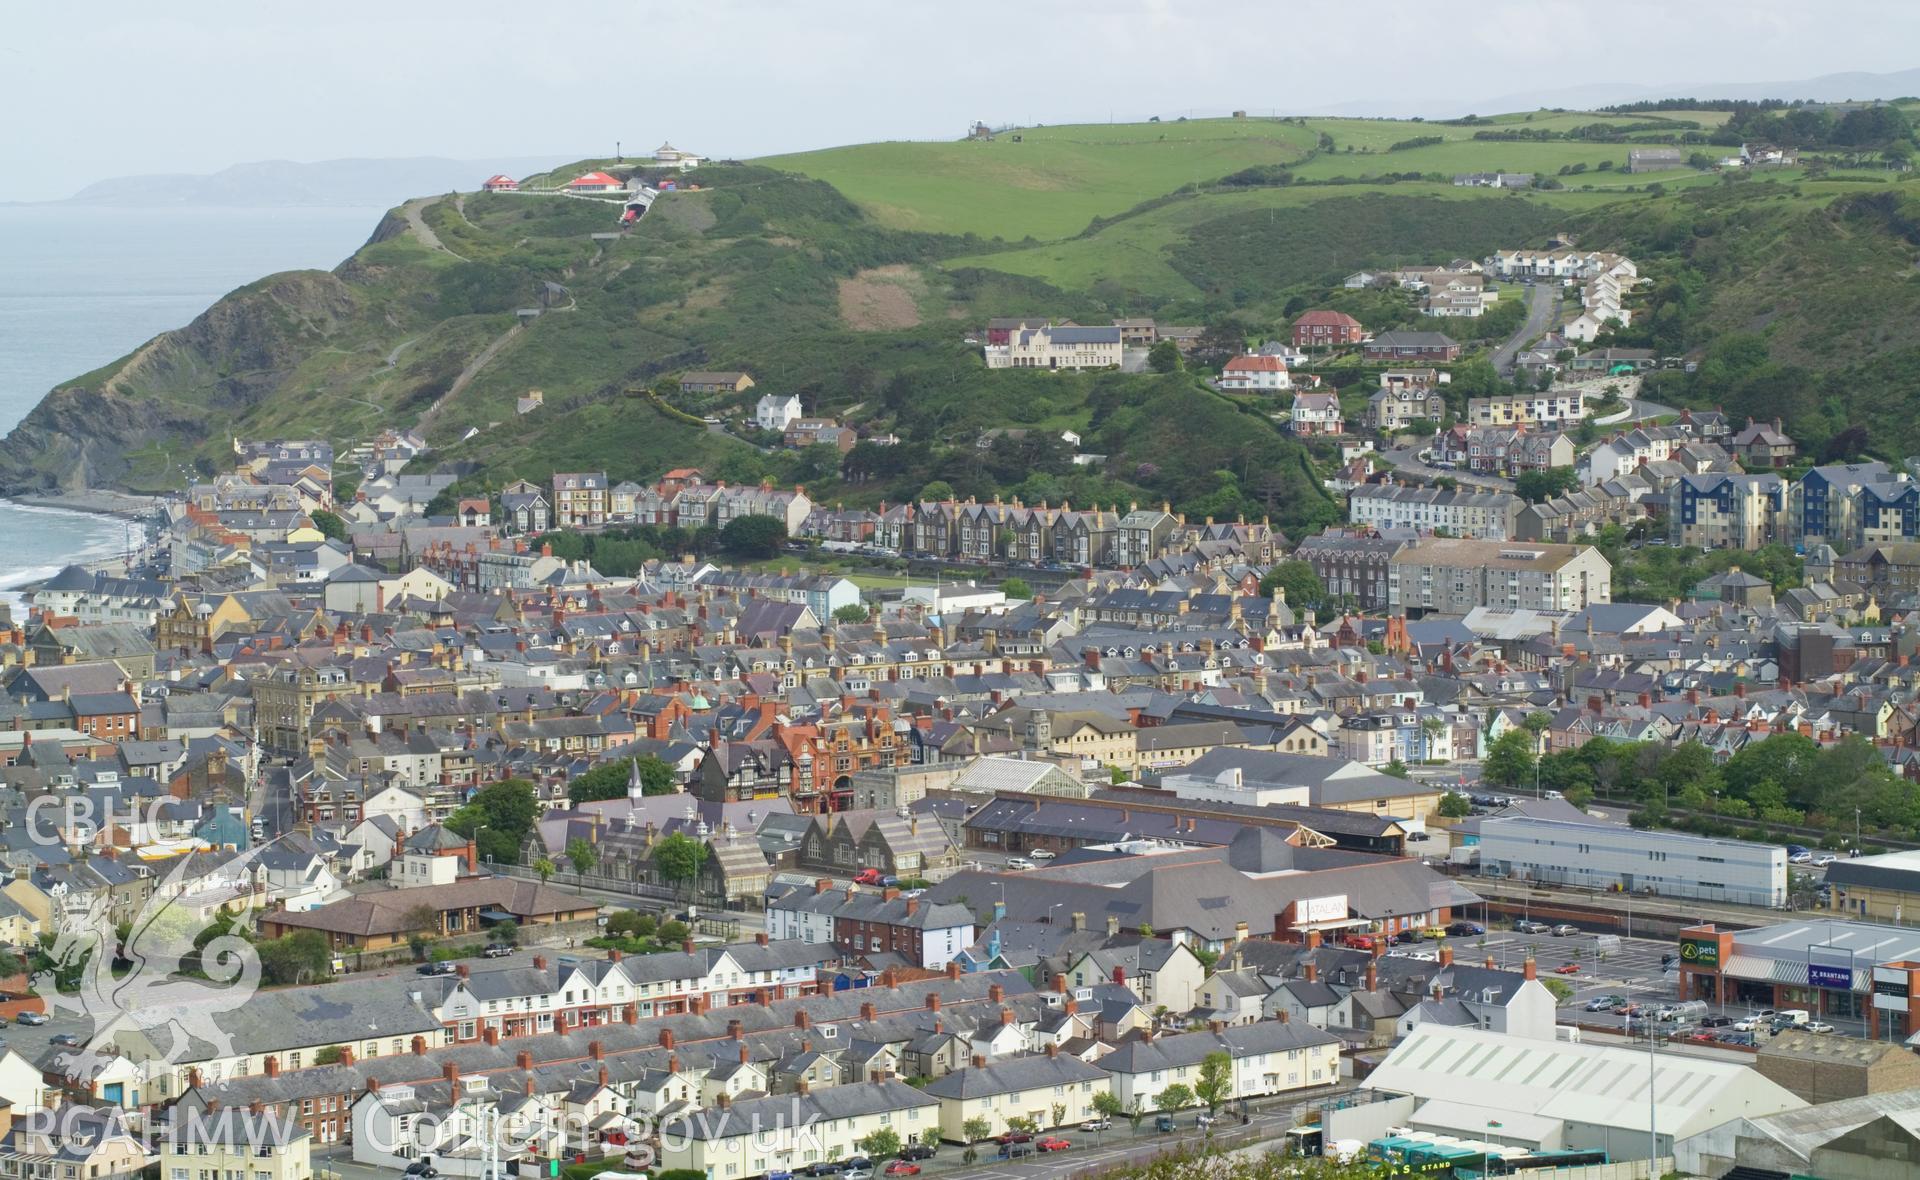 Central Aberystwyth from the south.